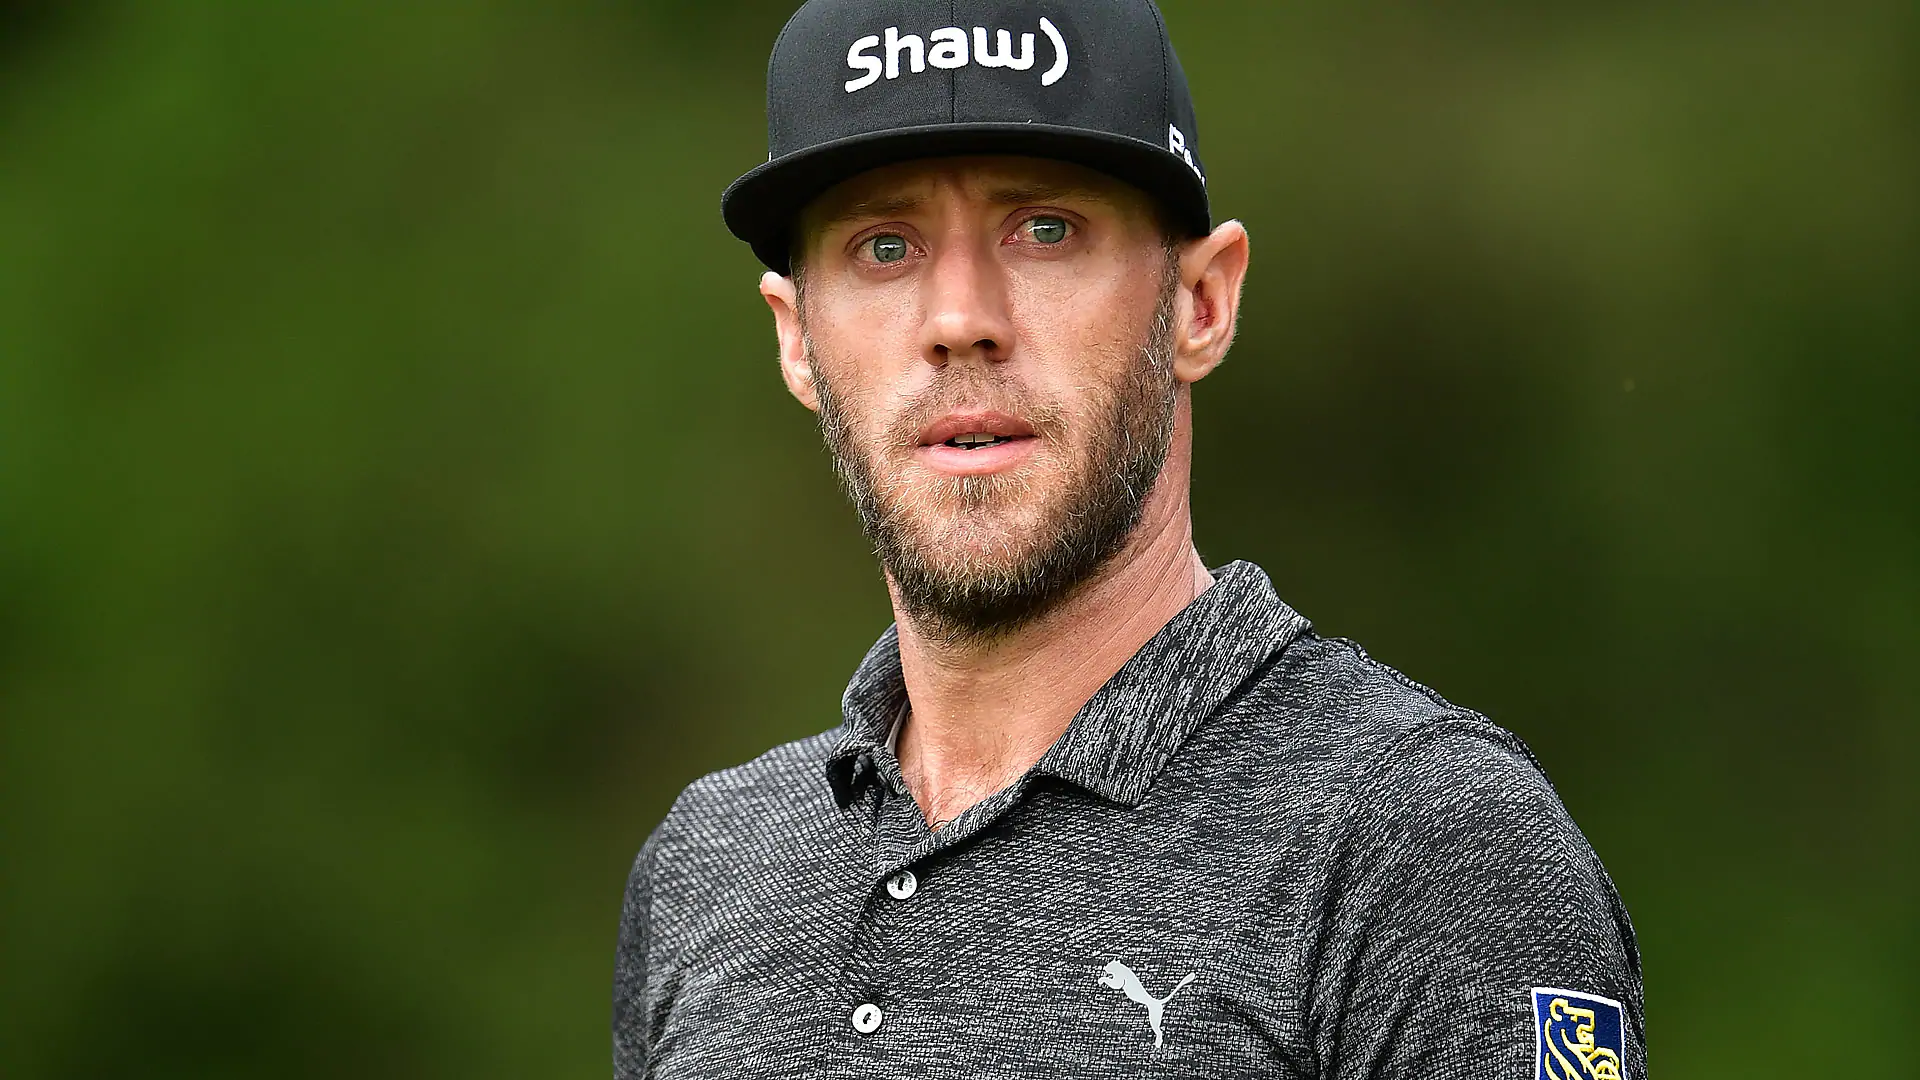 DeLaet opts for second back surgery; out 6-12 months